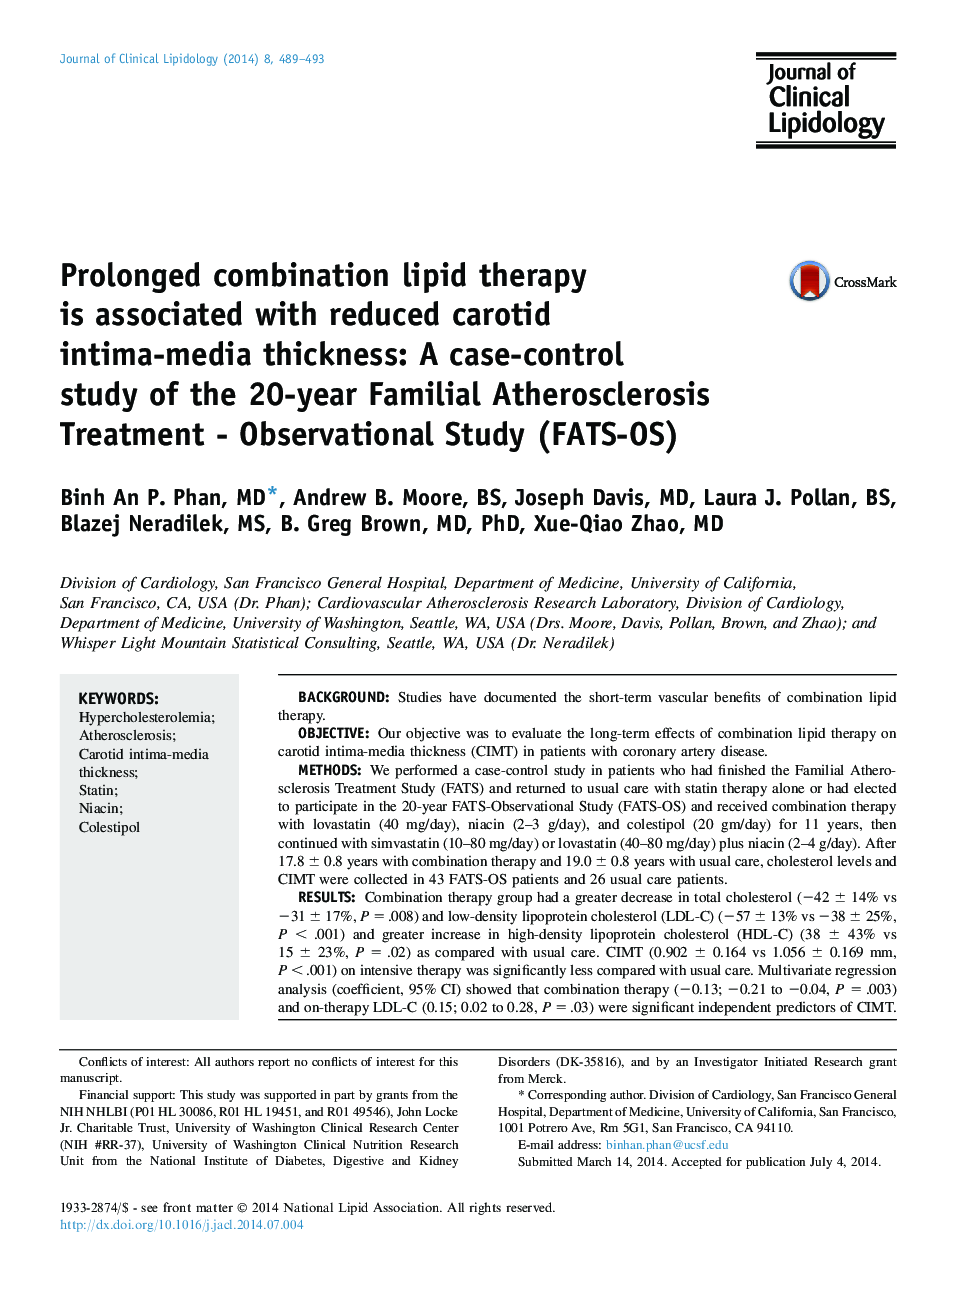 Prolonged combination lipid therapy is associated with reduced carotid intima-media thickness: A case-control study of the 20-year Familial Atherosclerosis Treatment - Observational Study (FATS-OS)